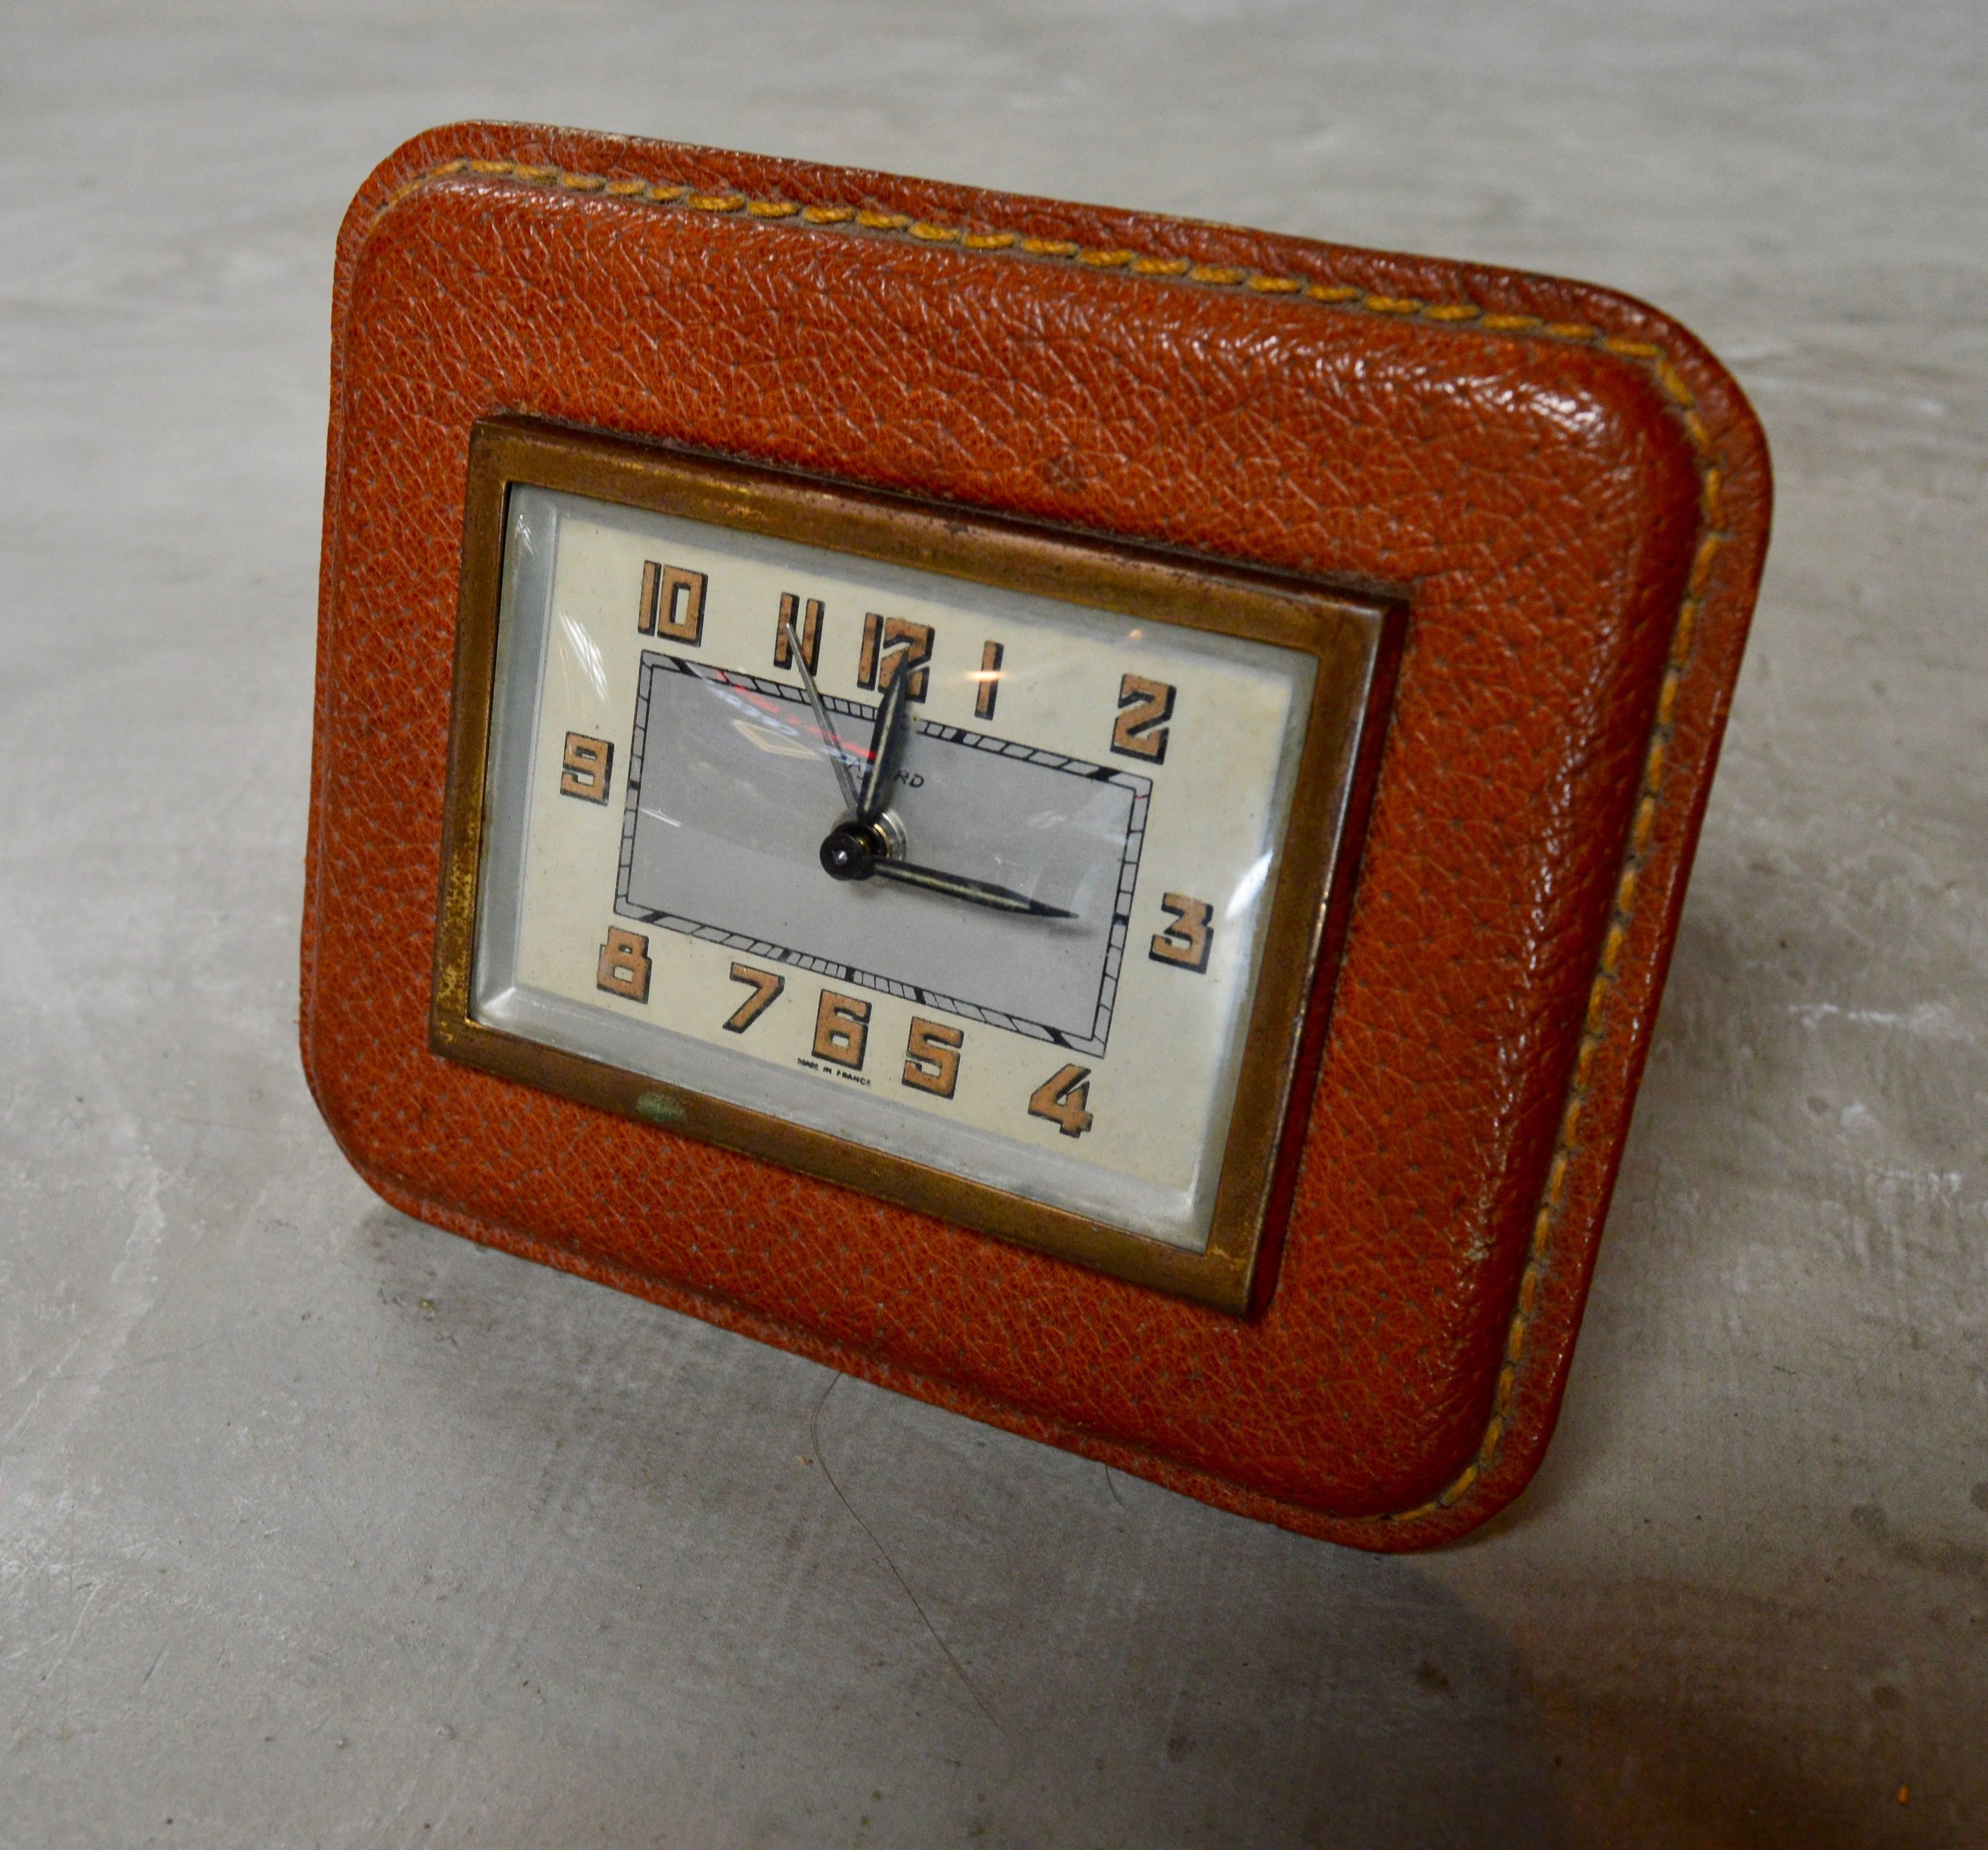 Handsome French saddle leather desk clock by Bayard in the style of Adnet. Excellent vintage condition. Keeps good time. Great patina to brass and leather.